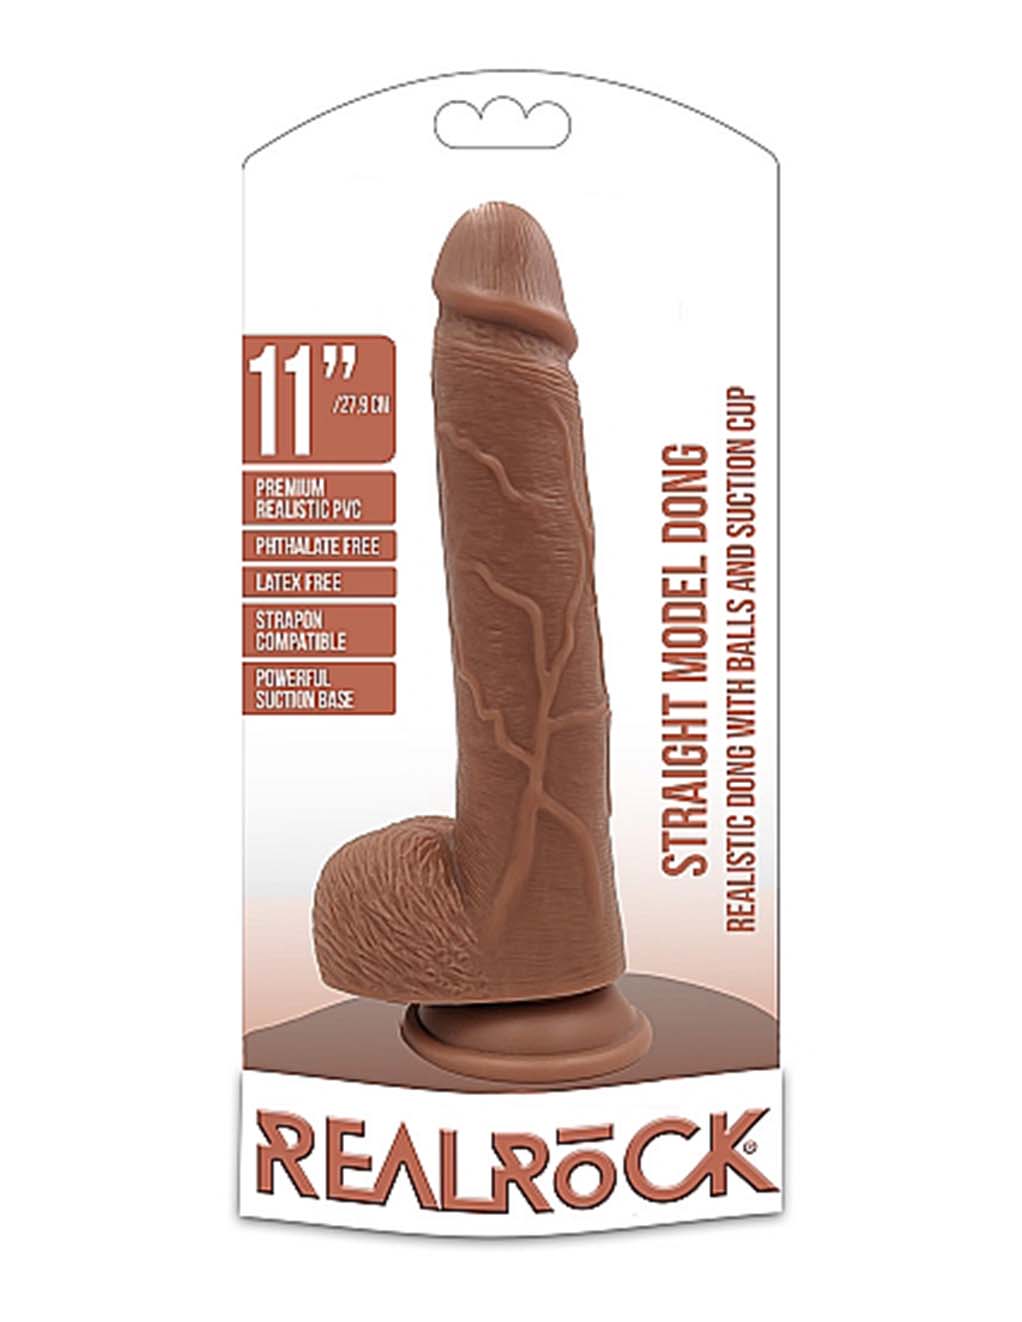 Real Rock Realistic 11" Dong with Balls- Caramel